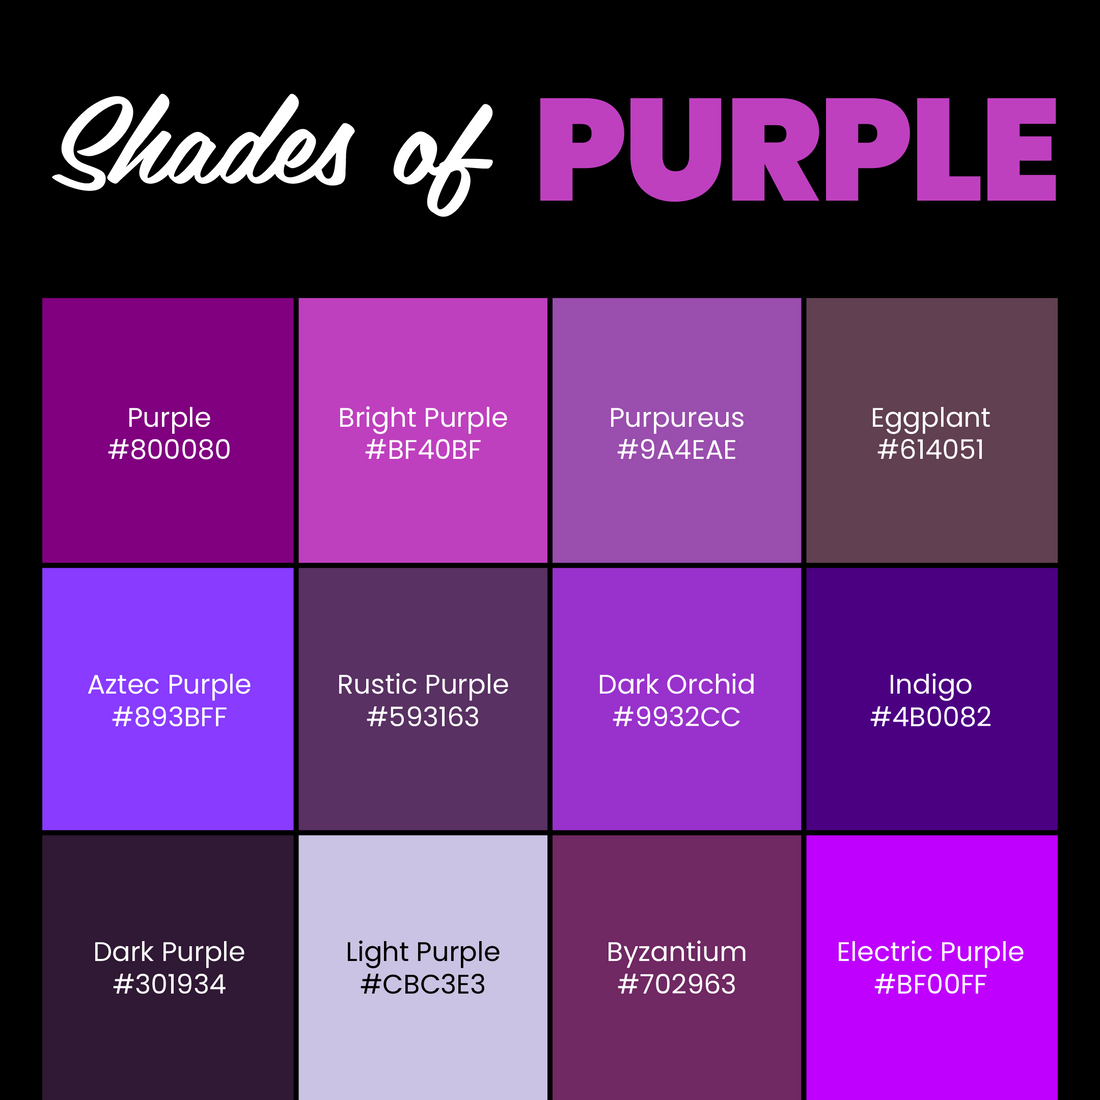 225+ Shades of Purple from A to Z (with Color Codes)